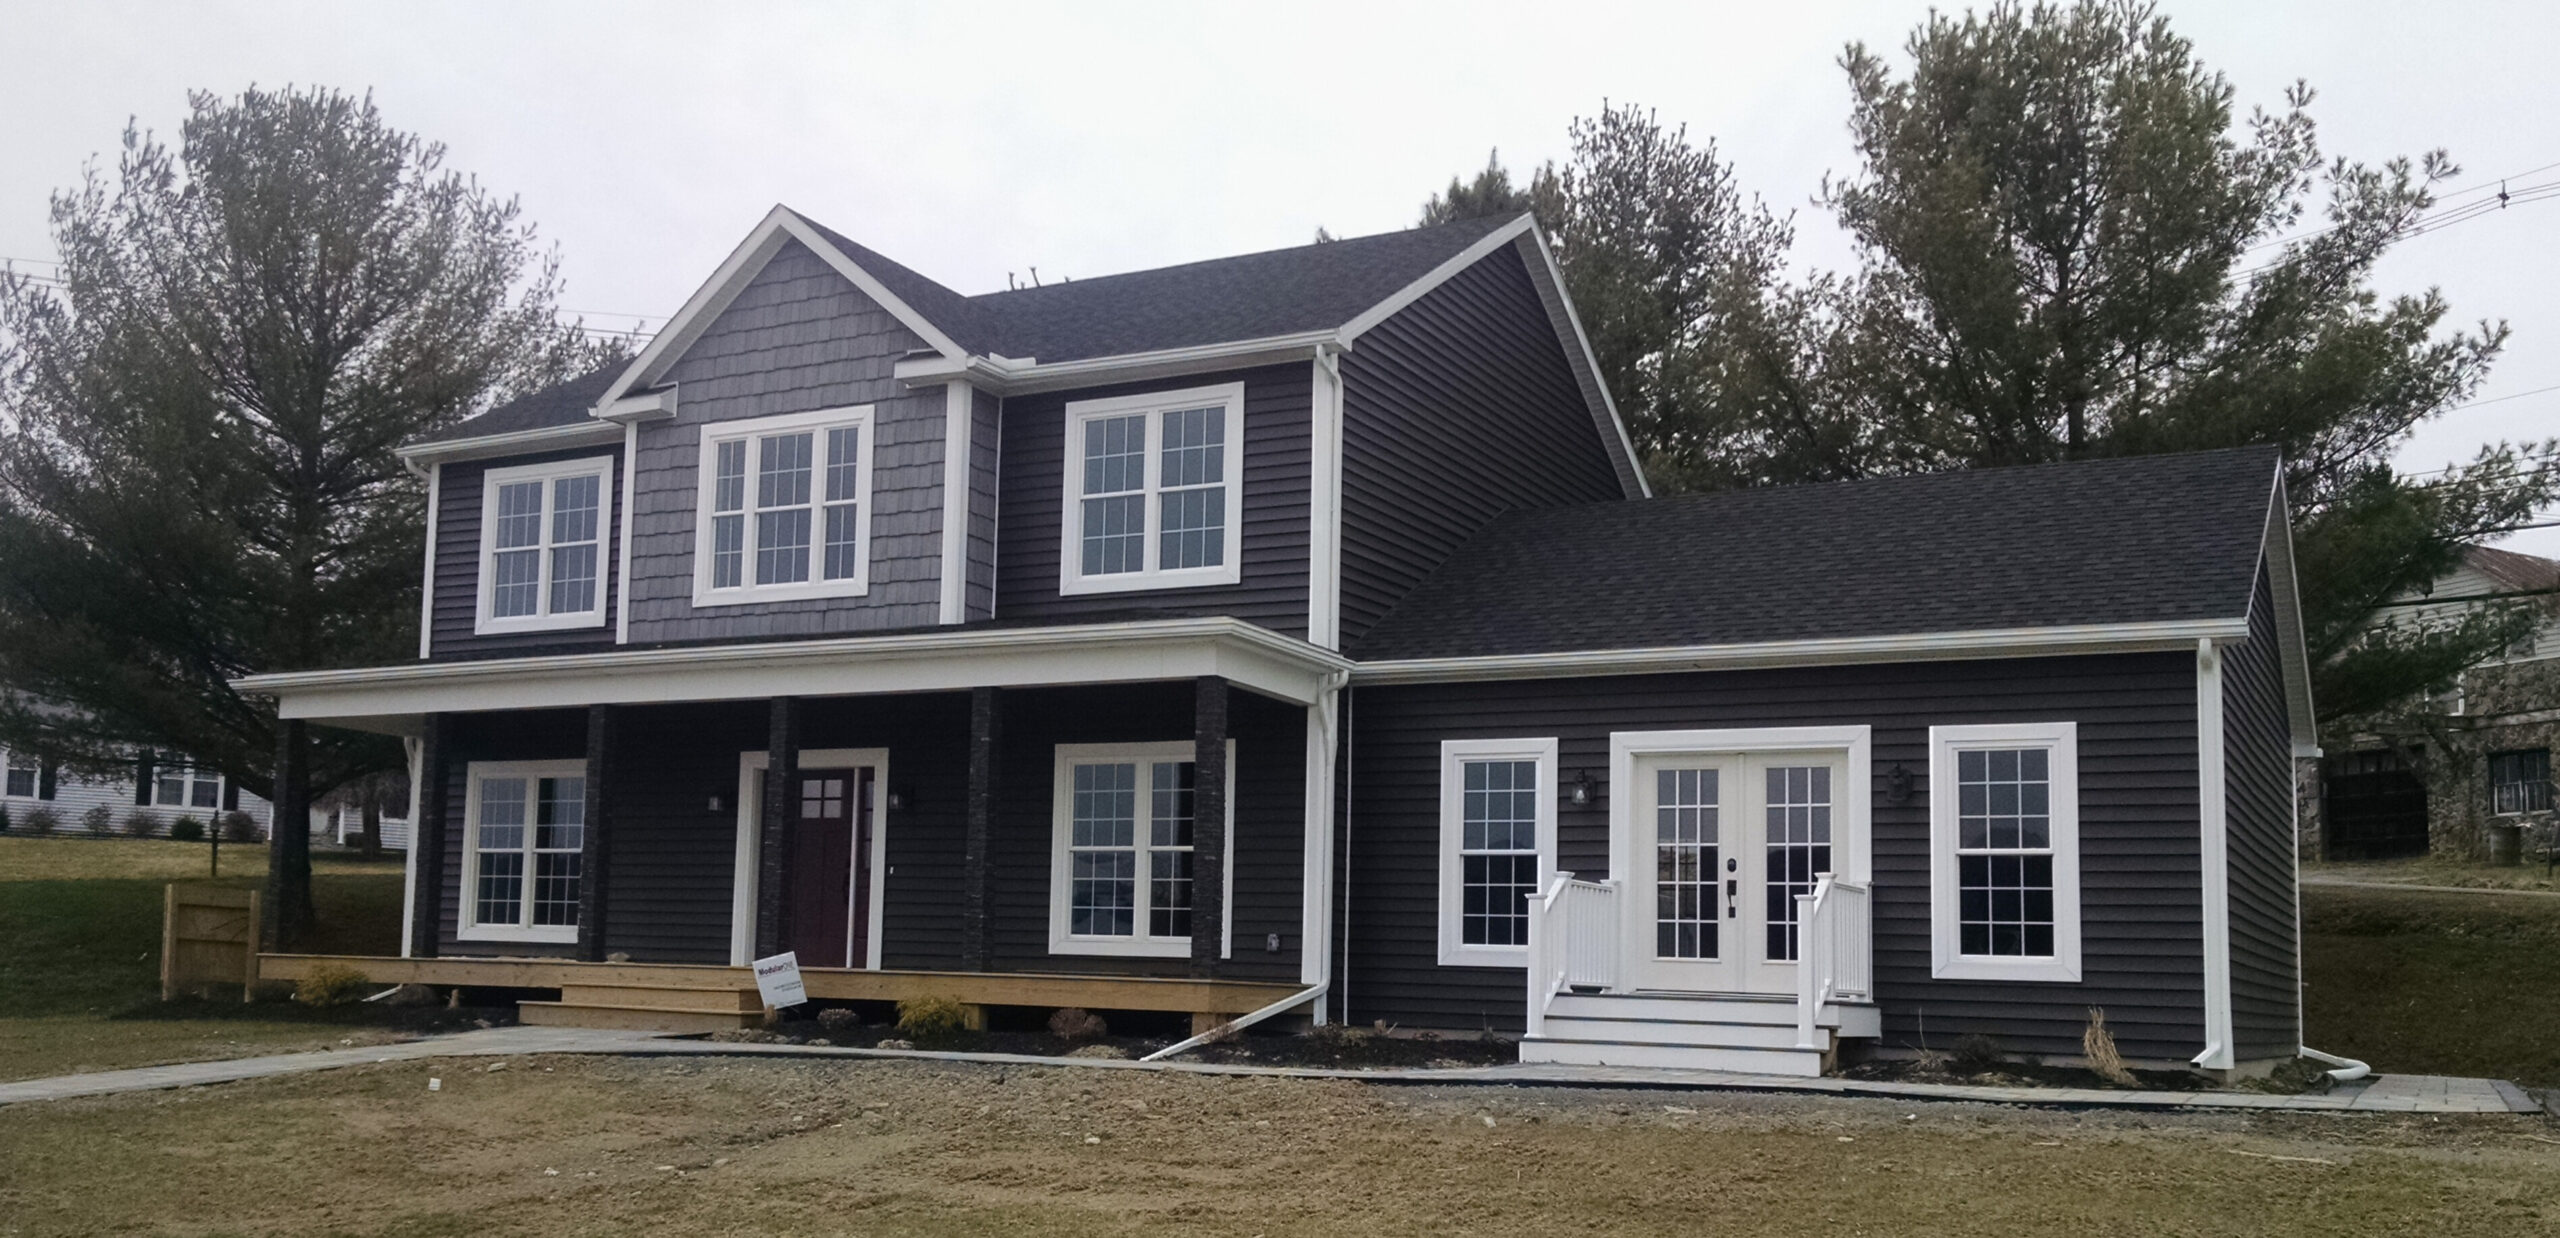 Affordable Modular Homes for sale in PA